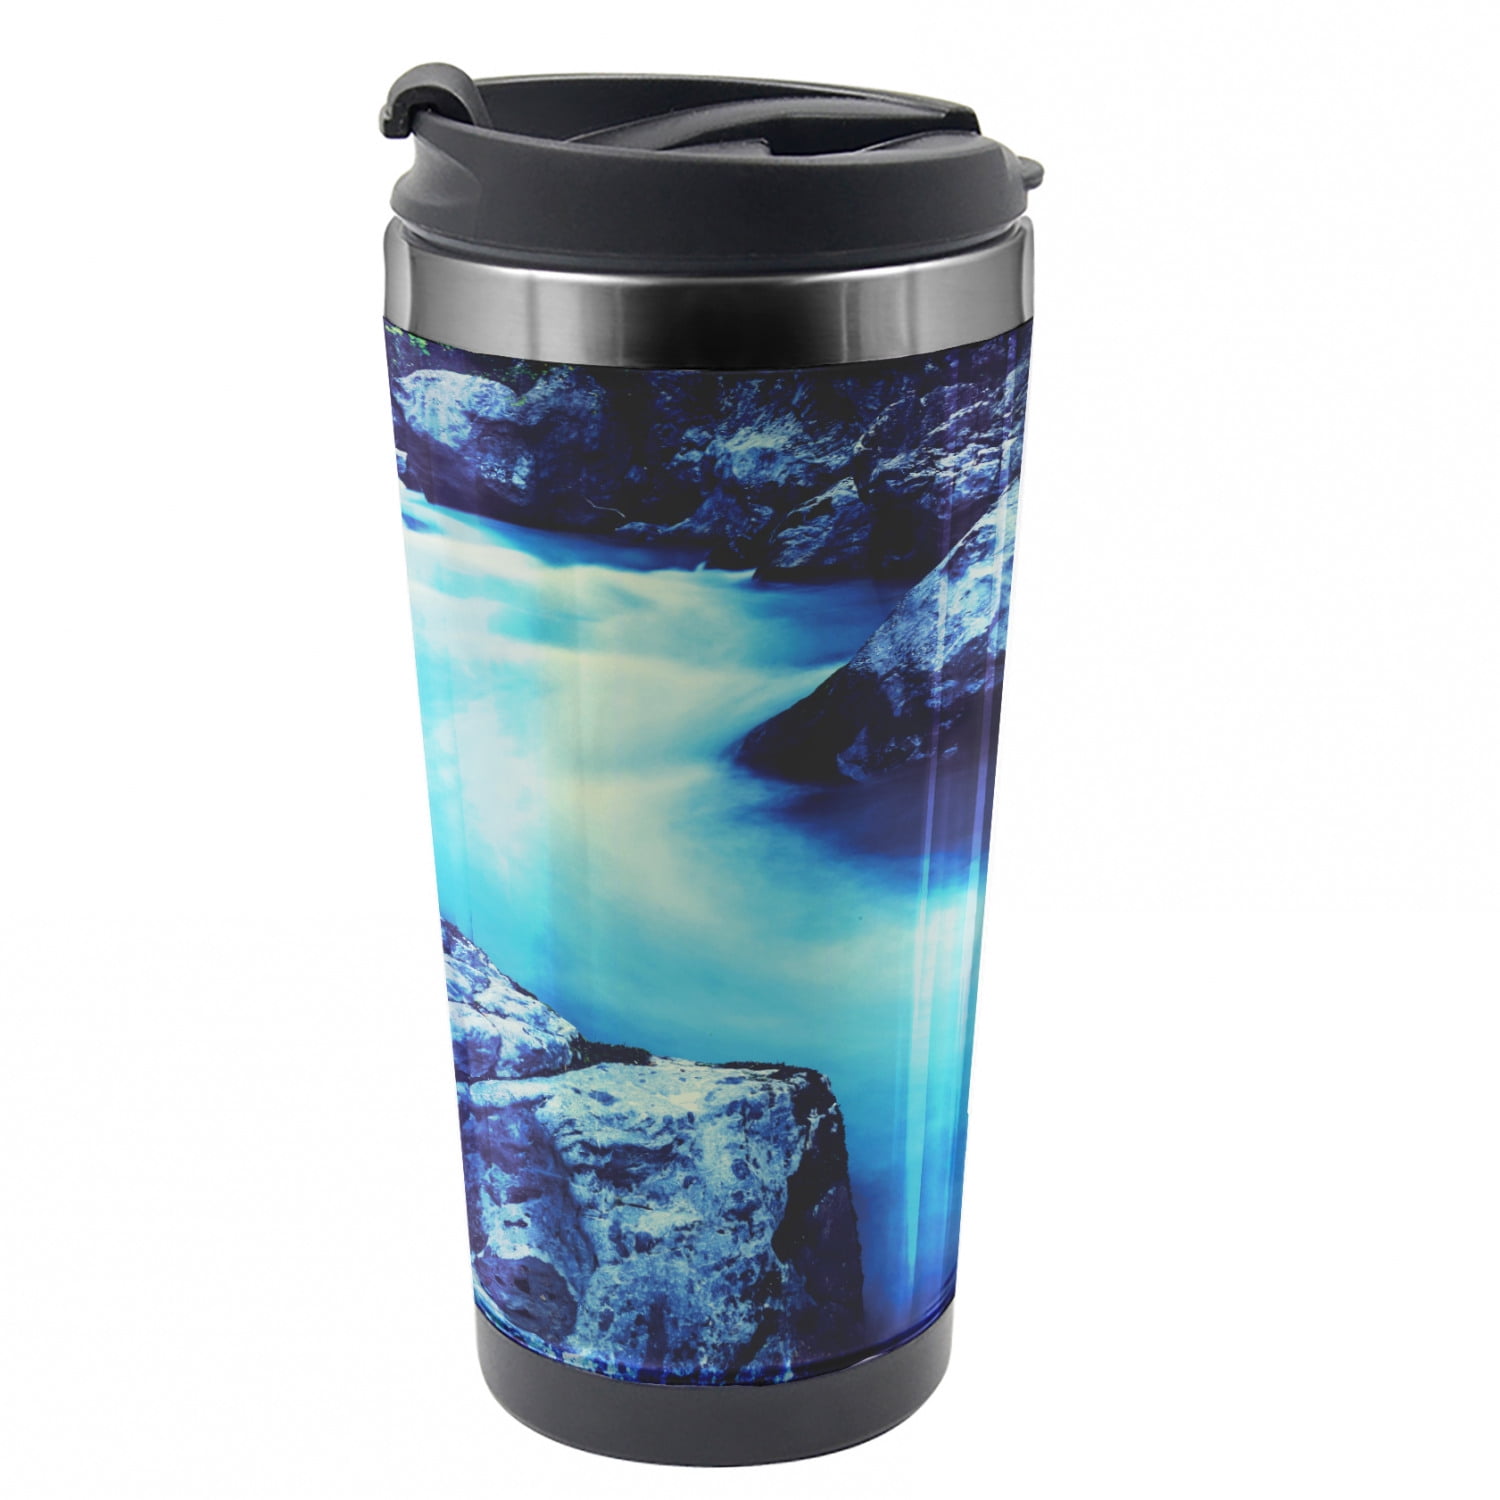 Waterfall Travel Mug, Frozen Lake in Winter, Steel Thermal Cup, 16 oz, by  Ambesonne